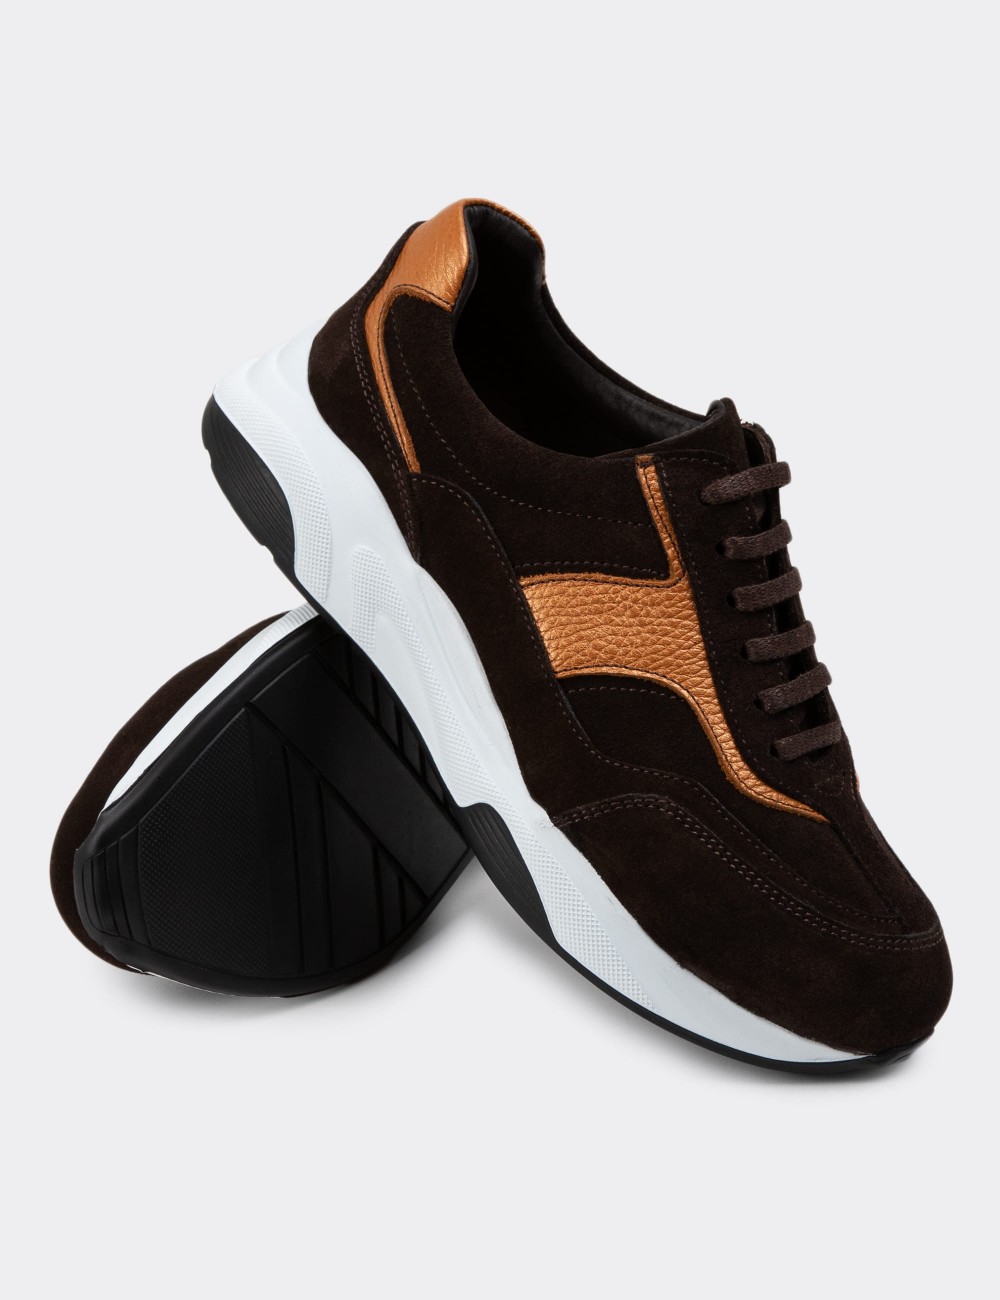 Brown Suede Leather Sneakers - 01890ZKHVE01